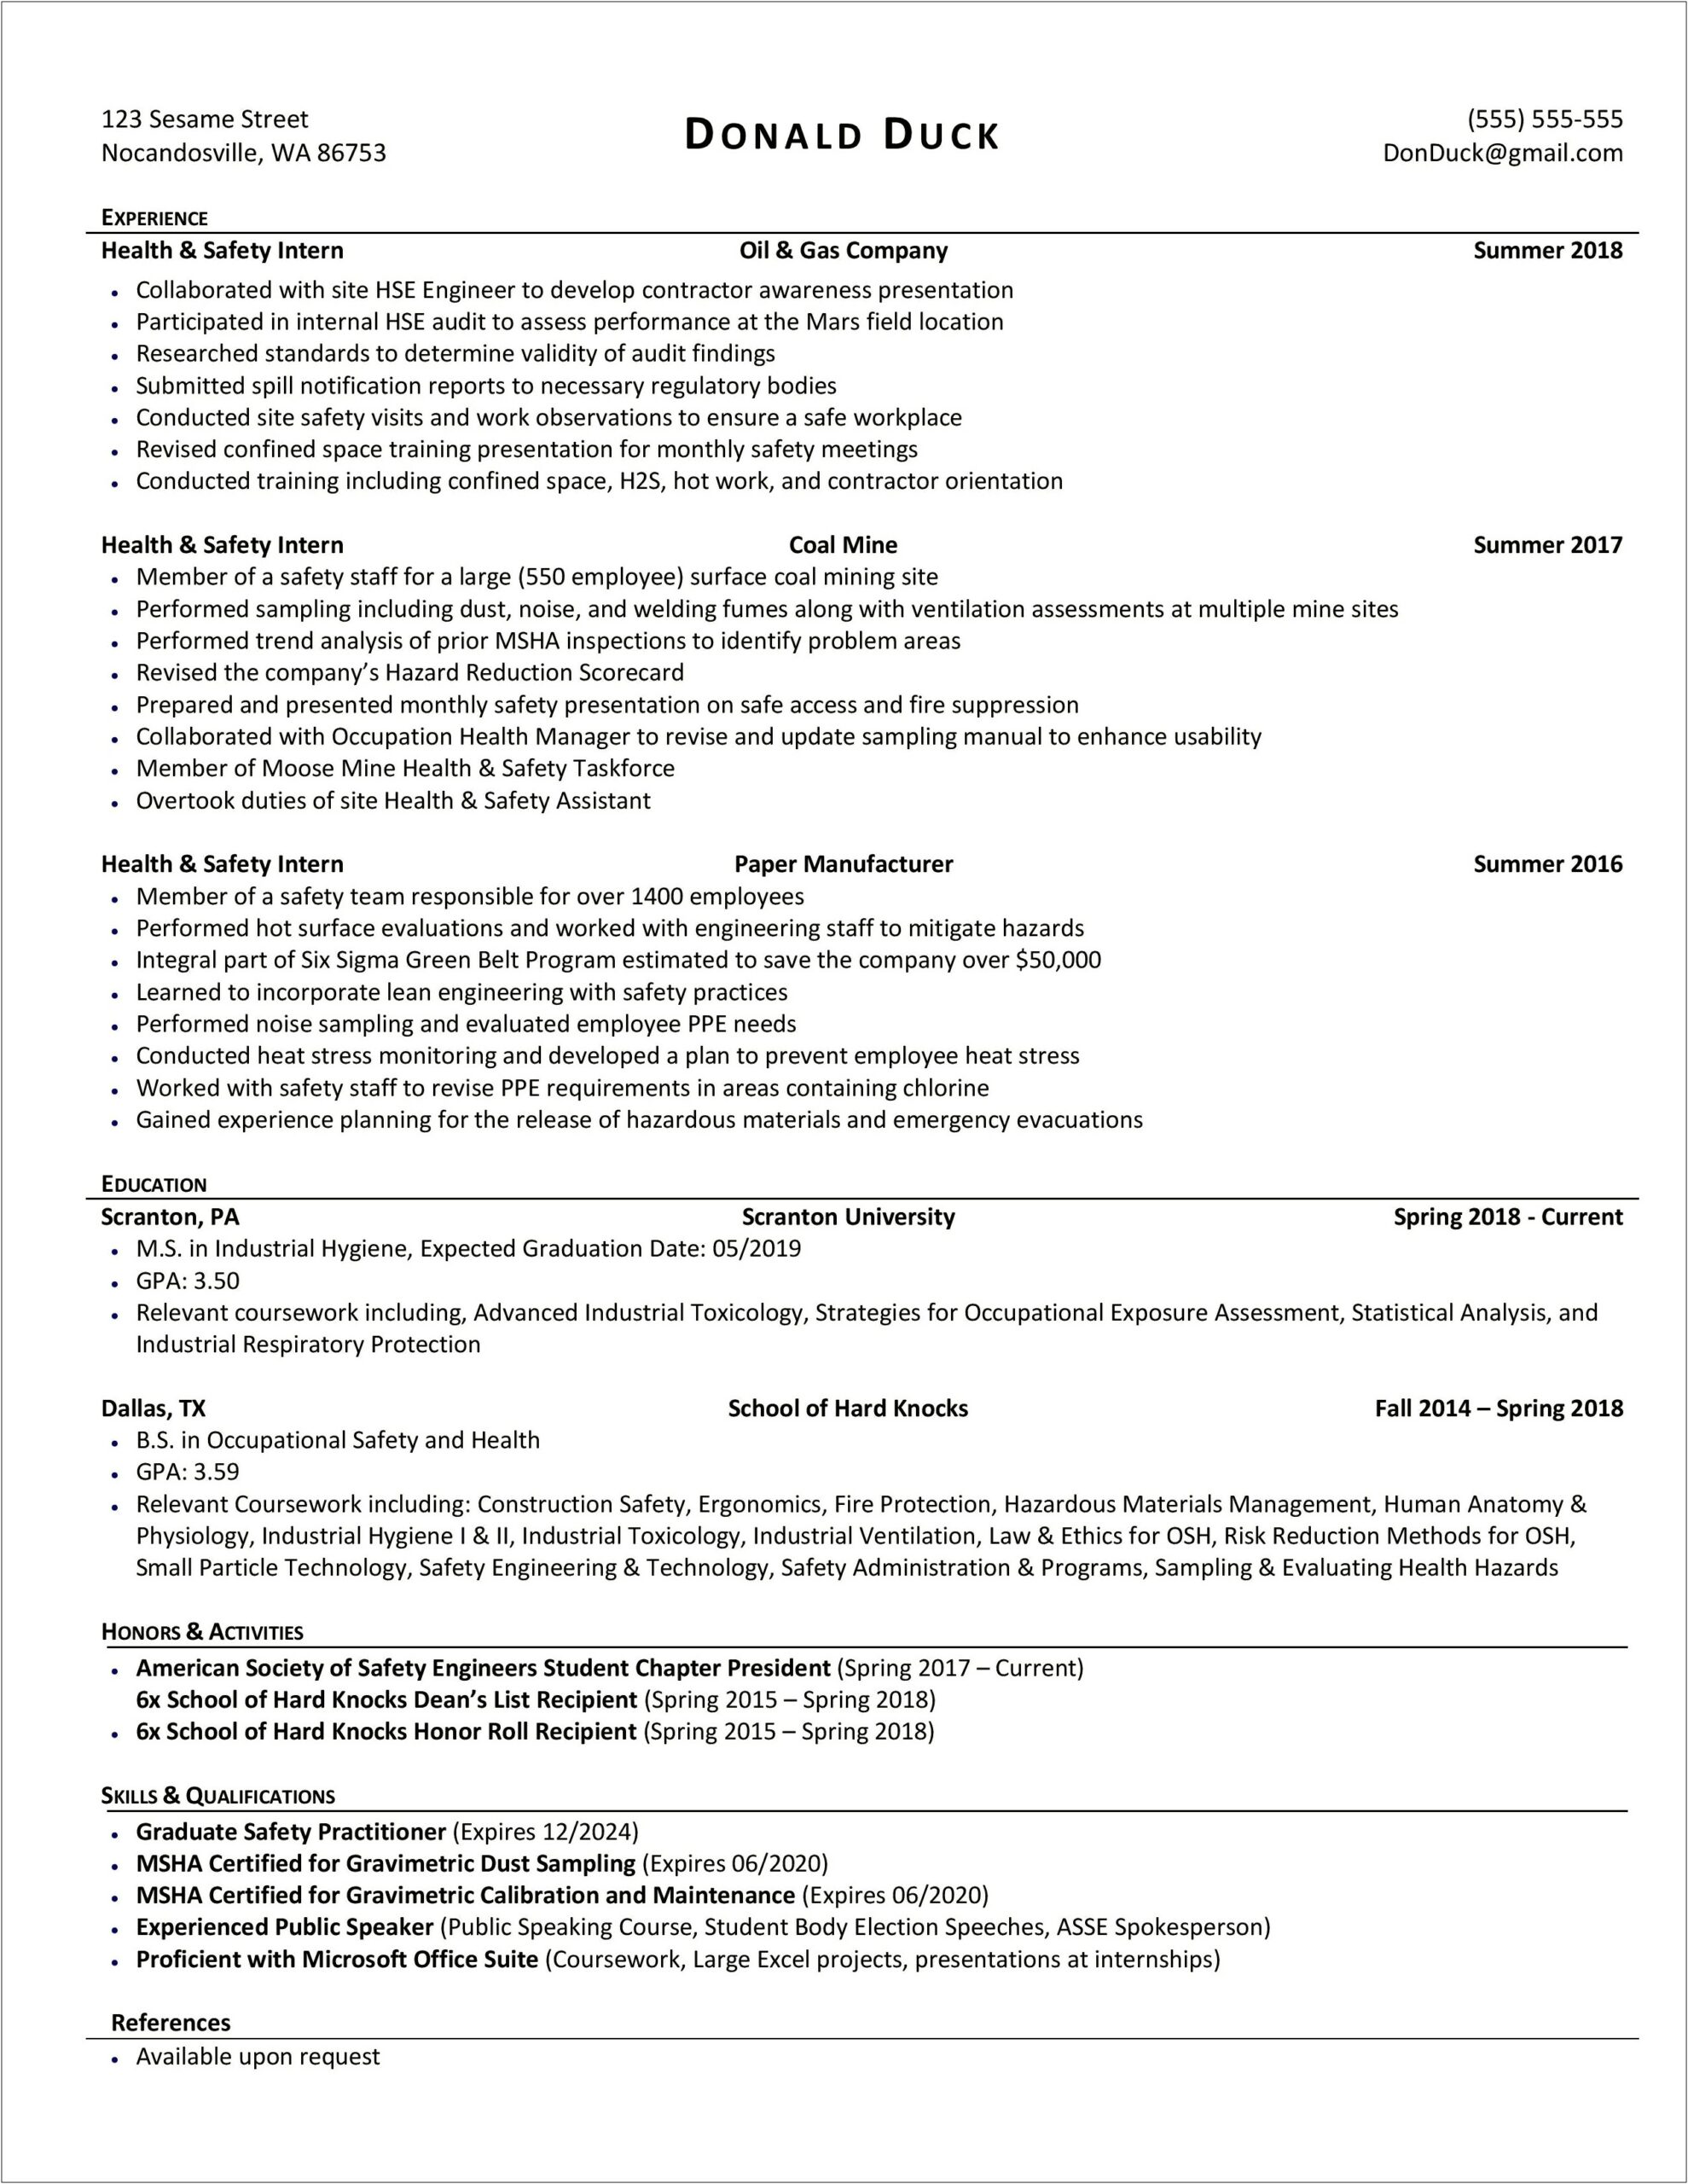 Graduated High School With Honors On Resume